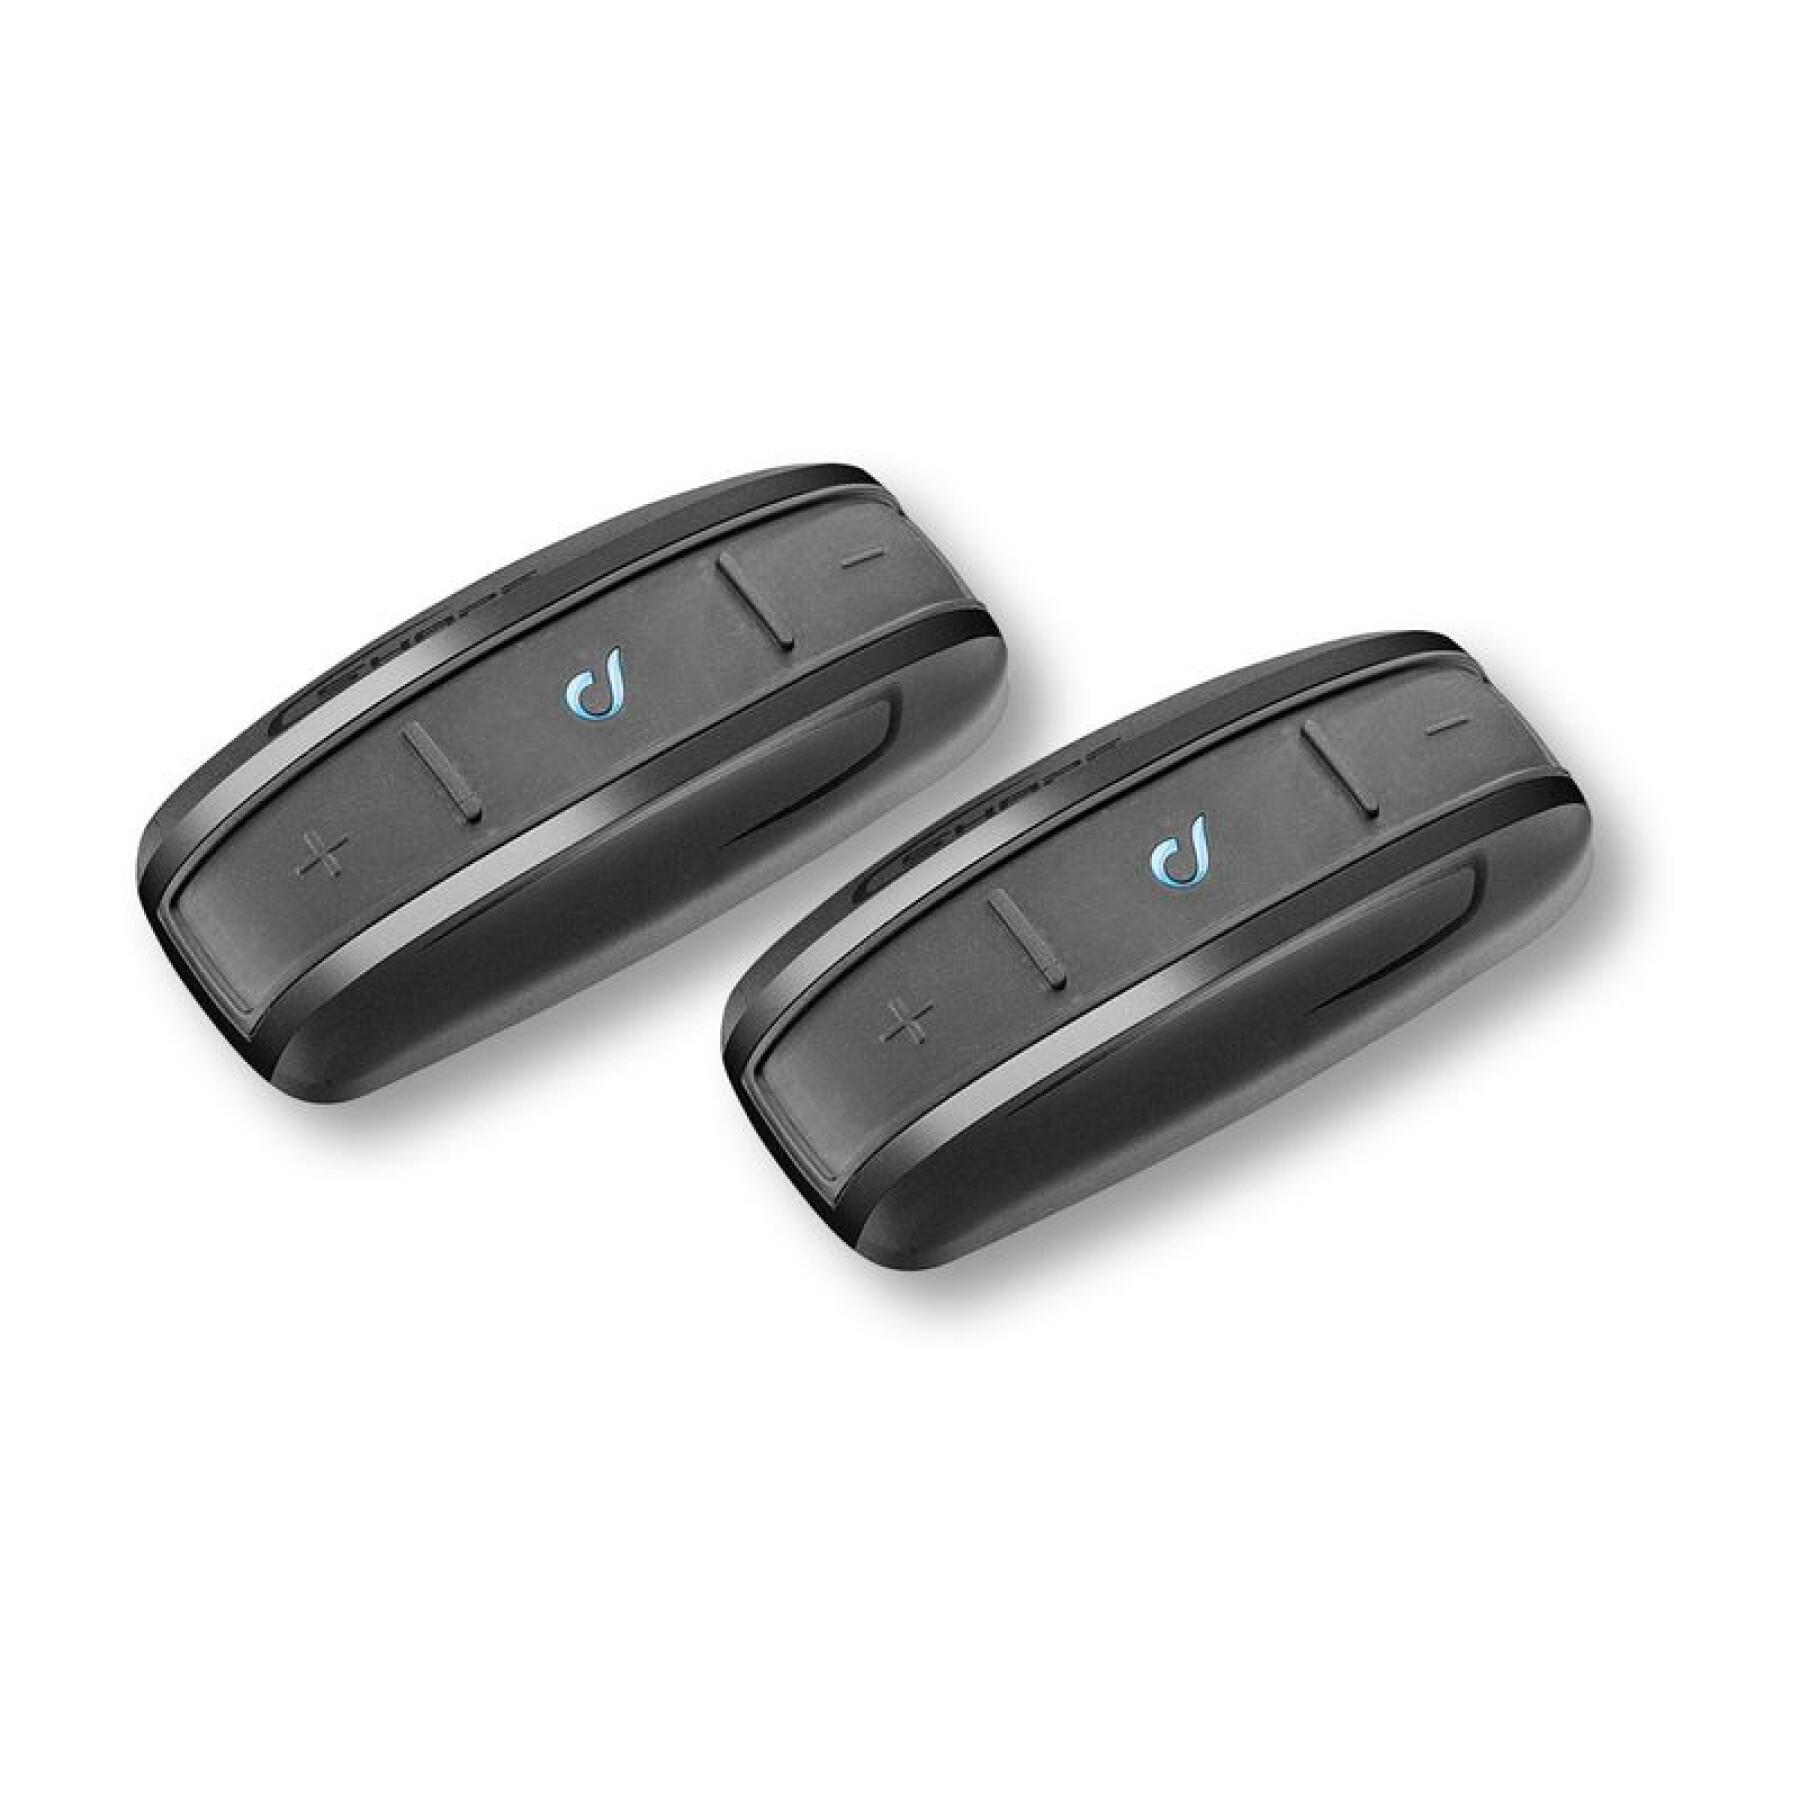 Citofono Cellularline SHAPE – Twin Pack